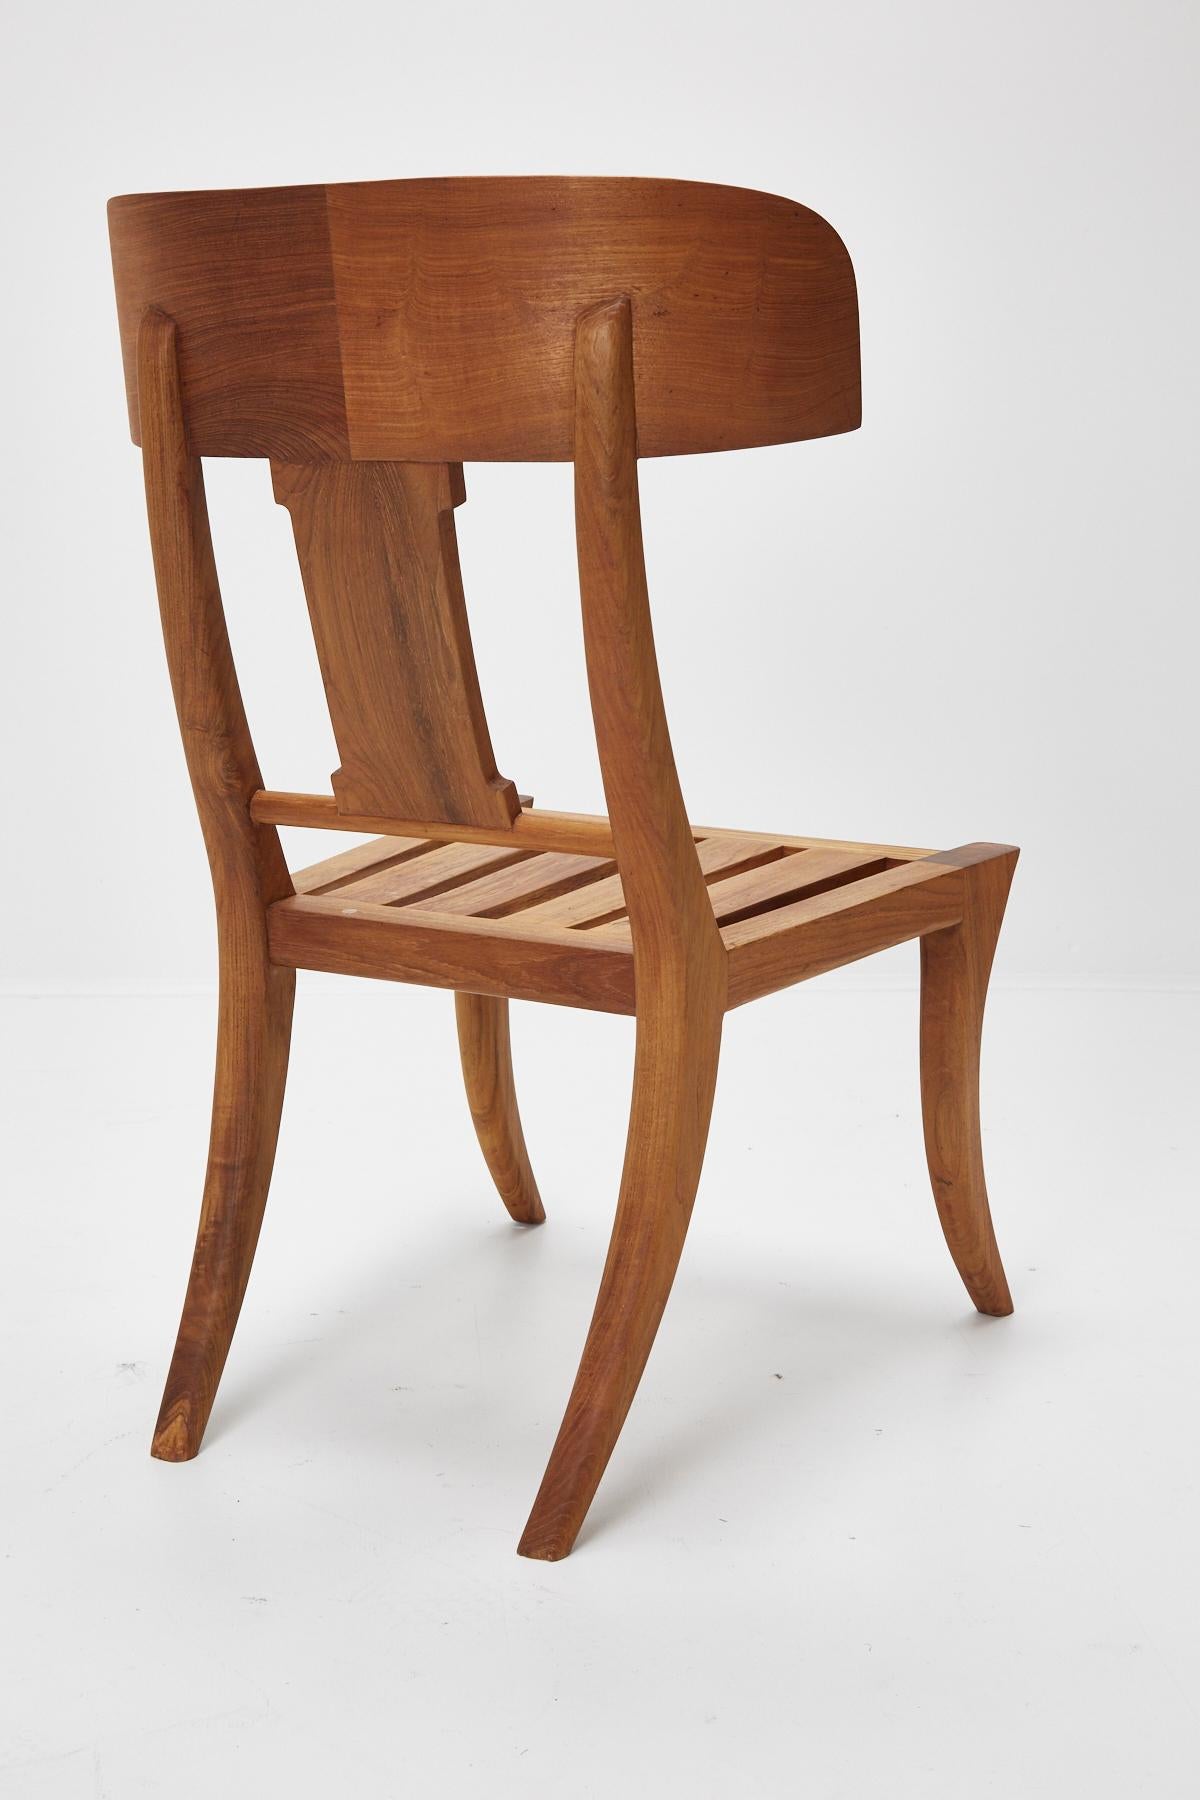 Contemporary Teak Klismos Side or Dining Chair by Michael Taylor Collections